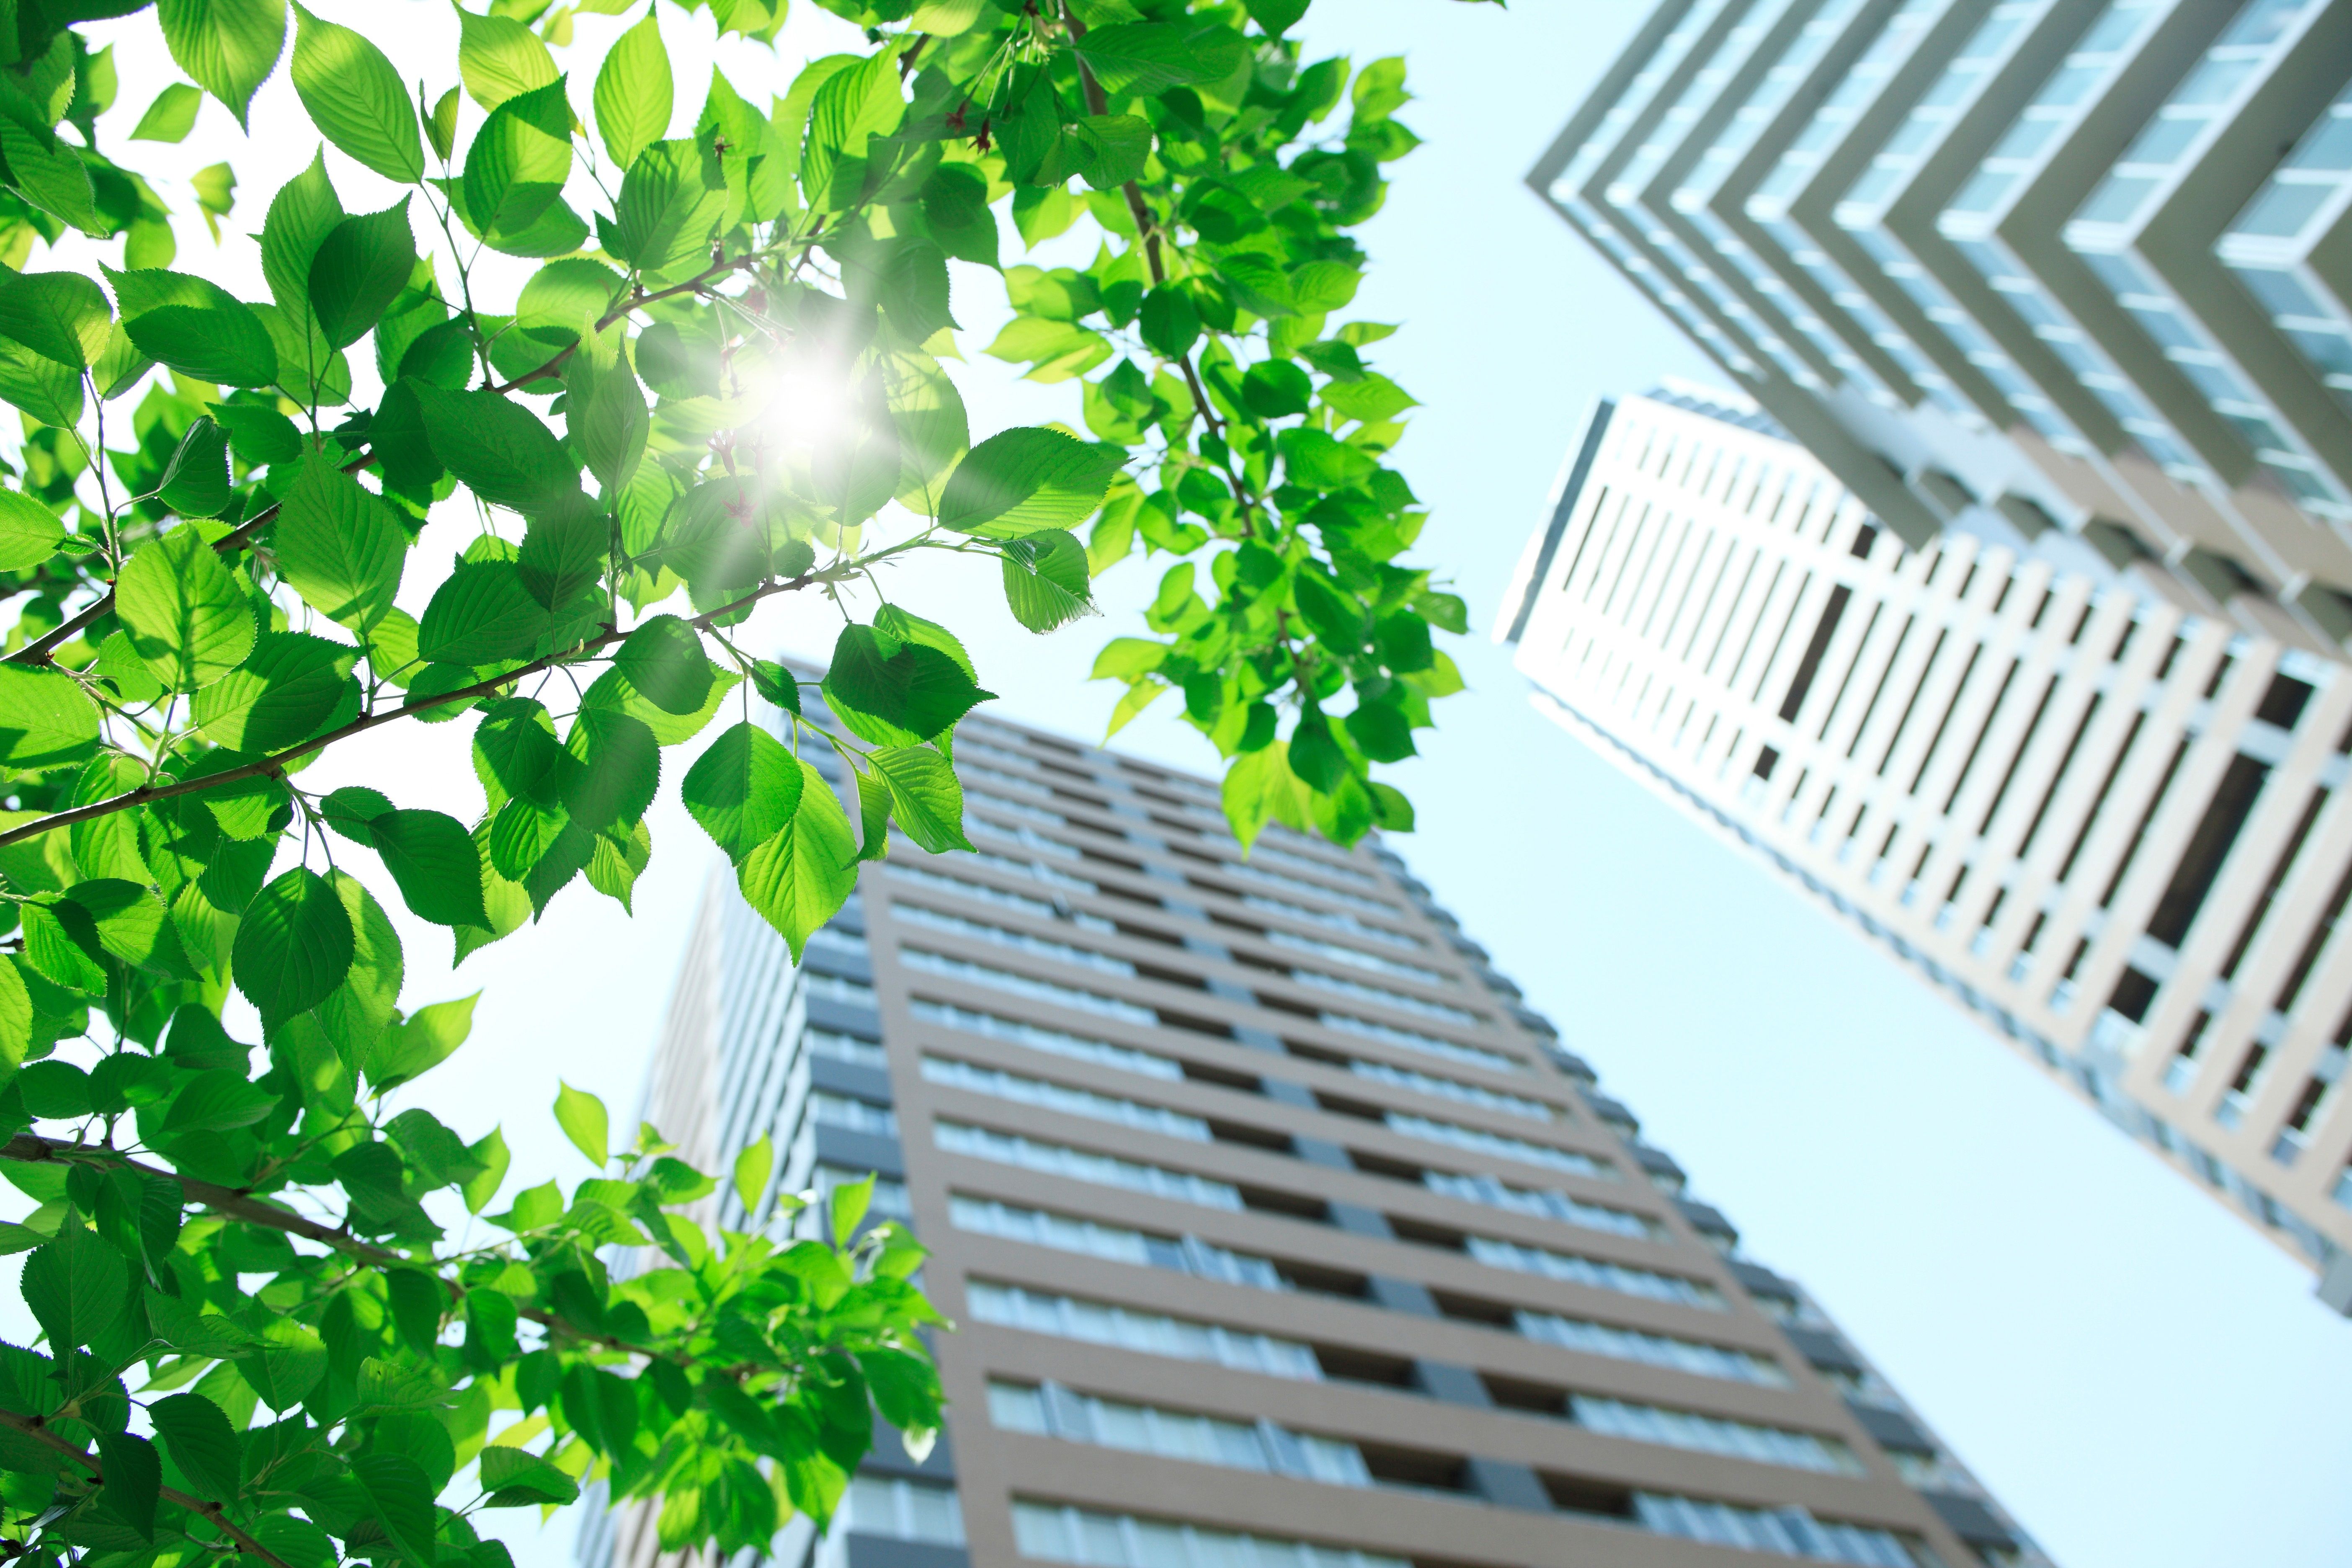 KNX on solutions for sustainability